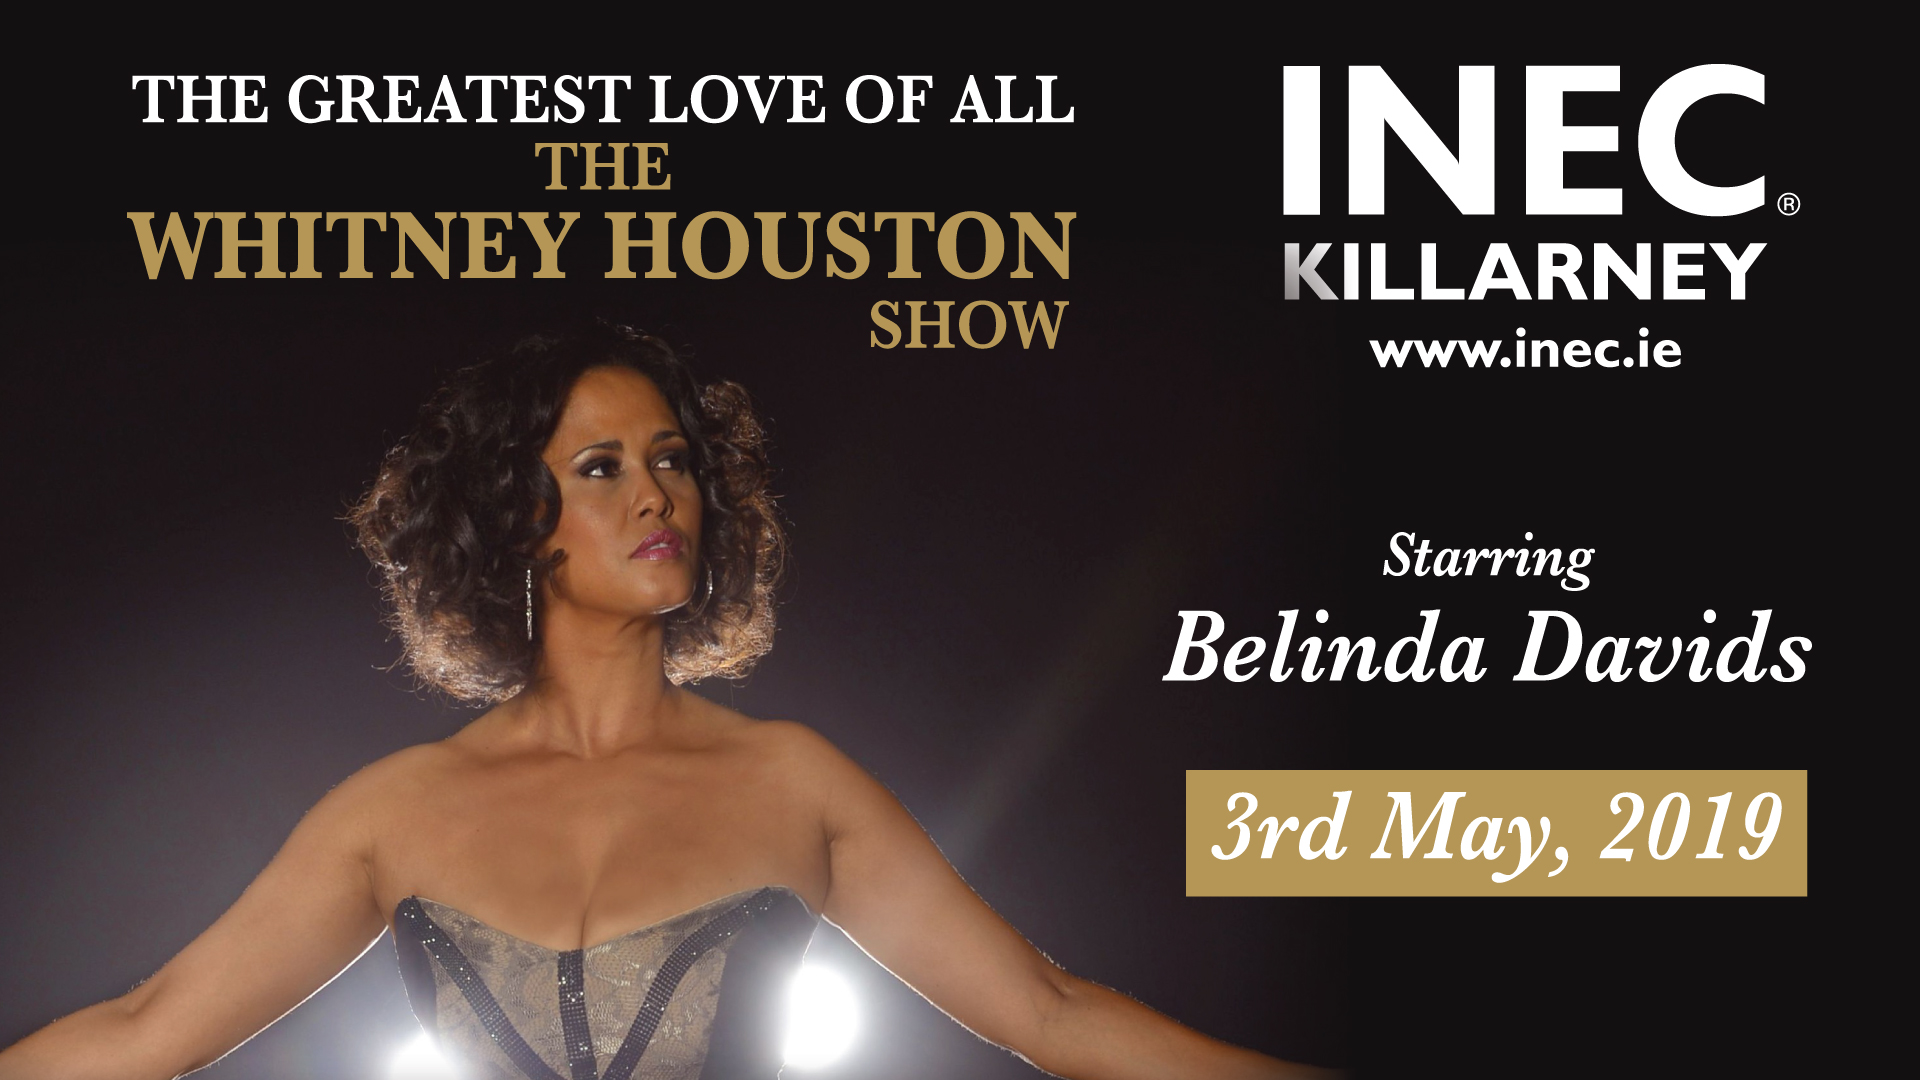 The Greatest Love of All - The Whitney Houston Show comes to the INEC Killarney on May 3rd 2019